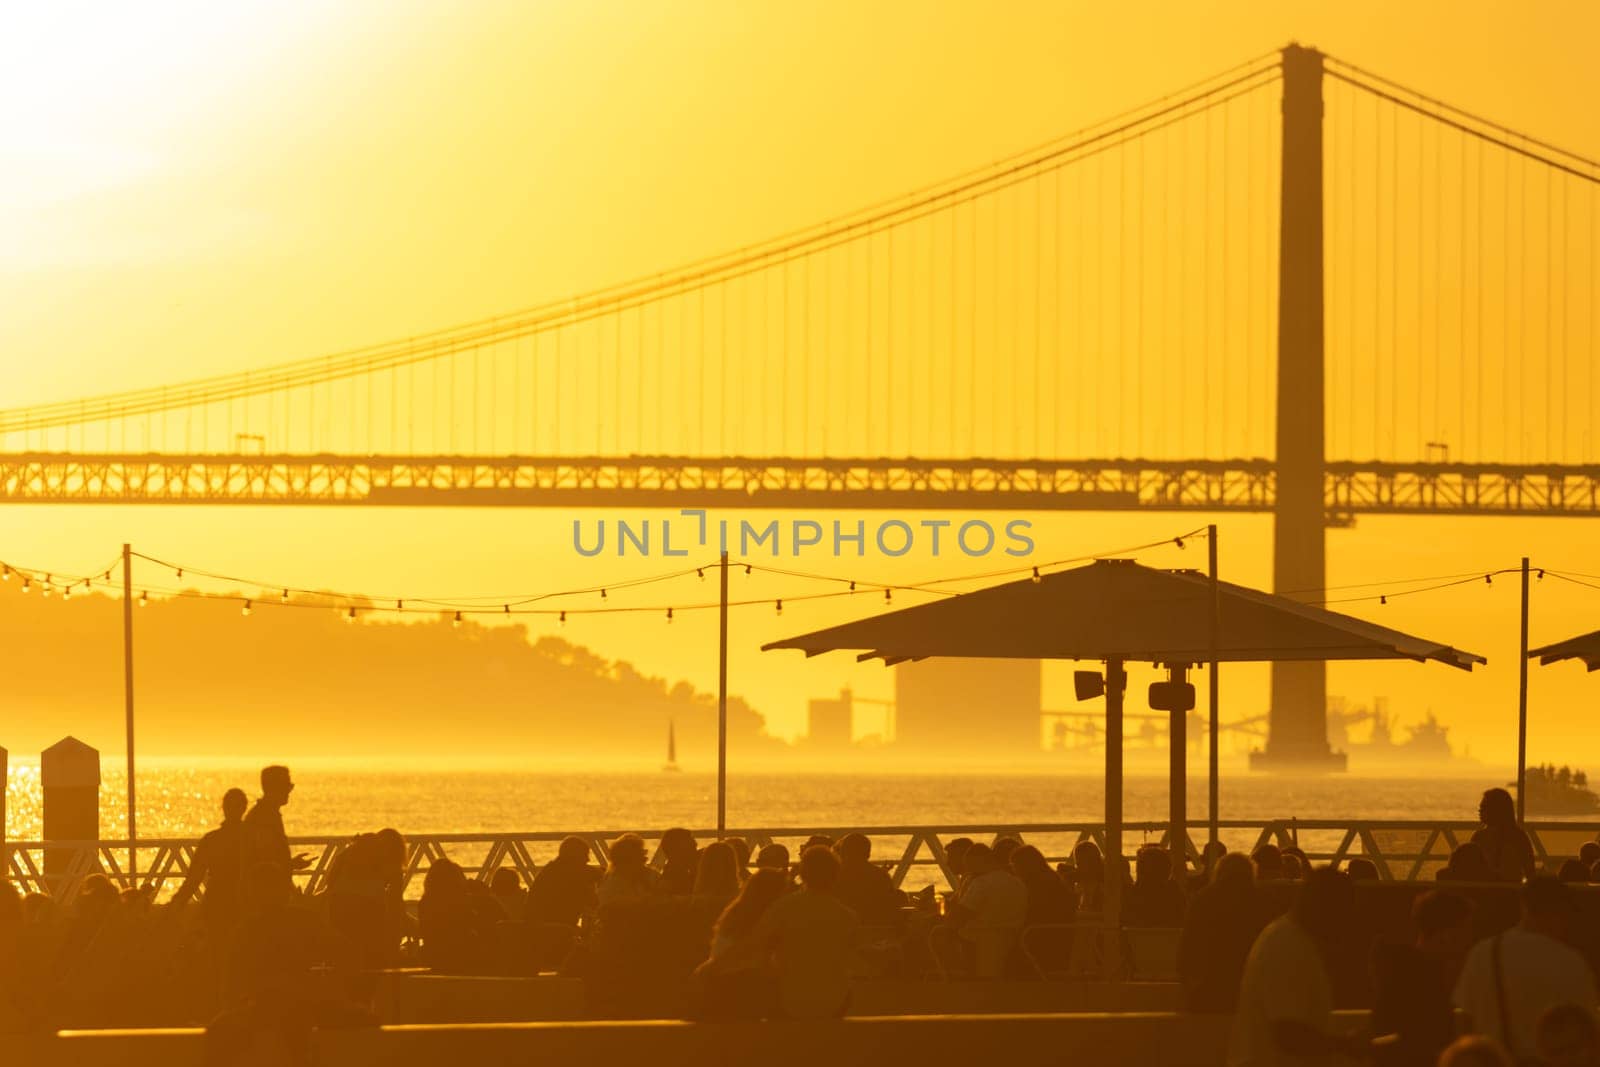 A Serene Evening by the Bridge: People Relaxing Under Umbrellas as the Ocean Glows with Sunset by Studia72